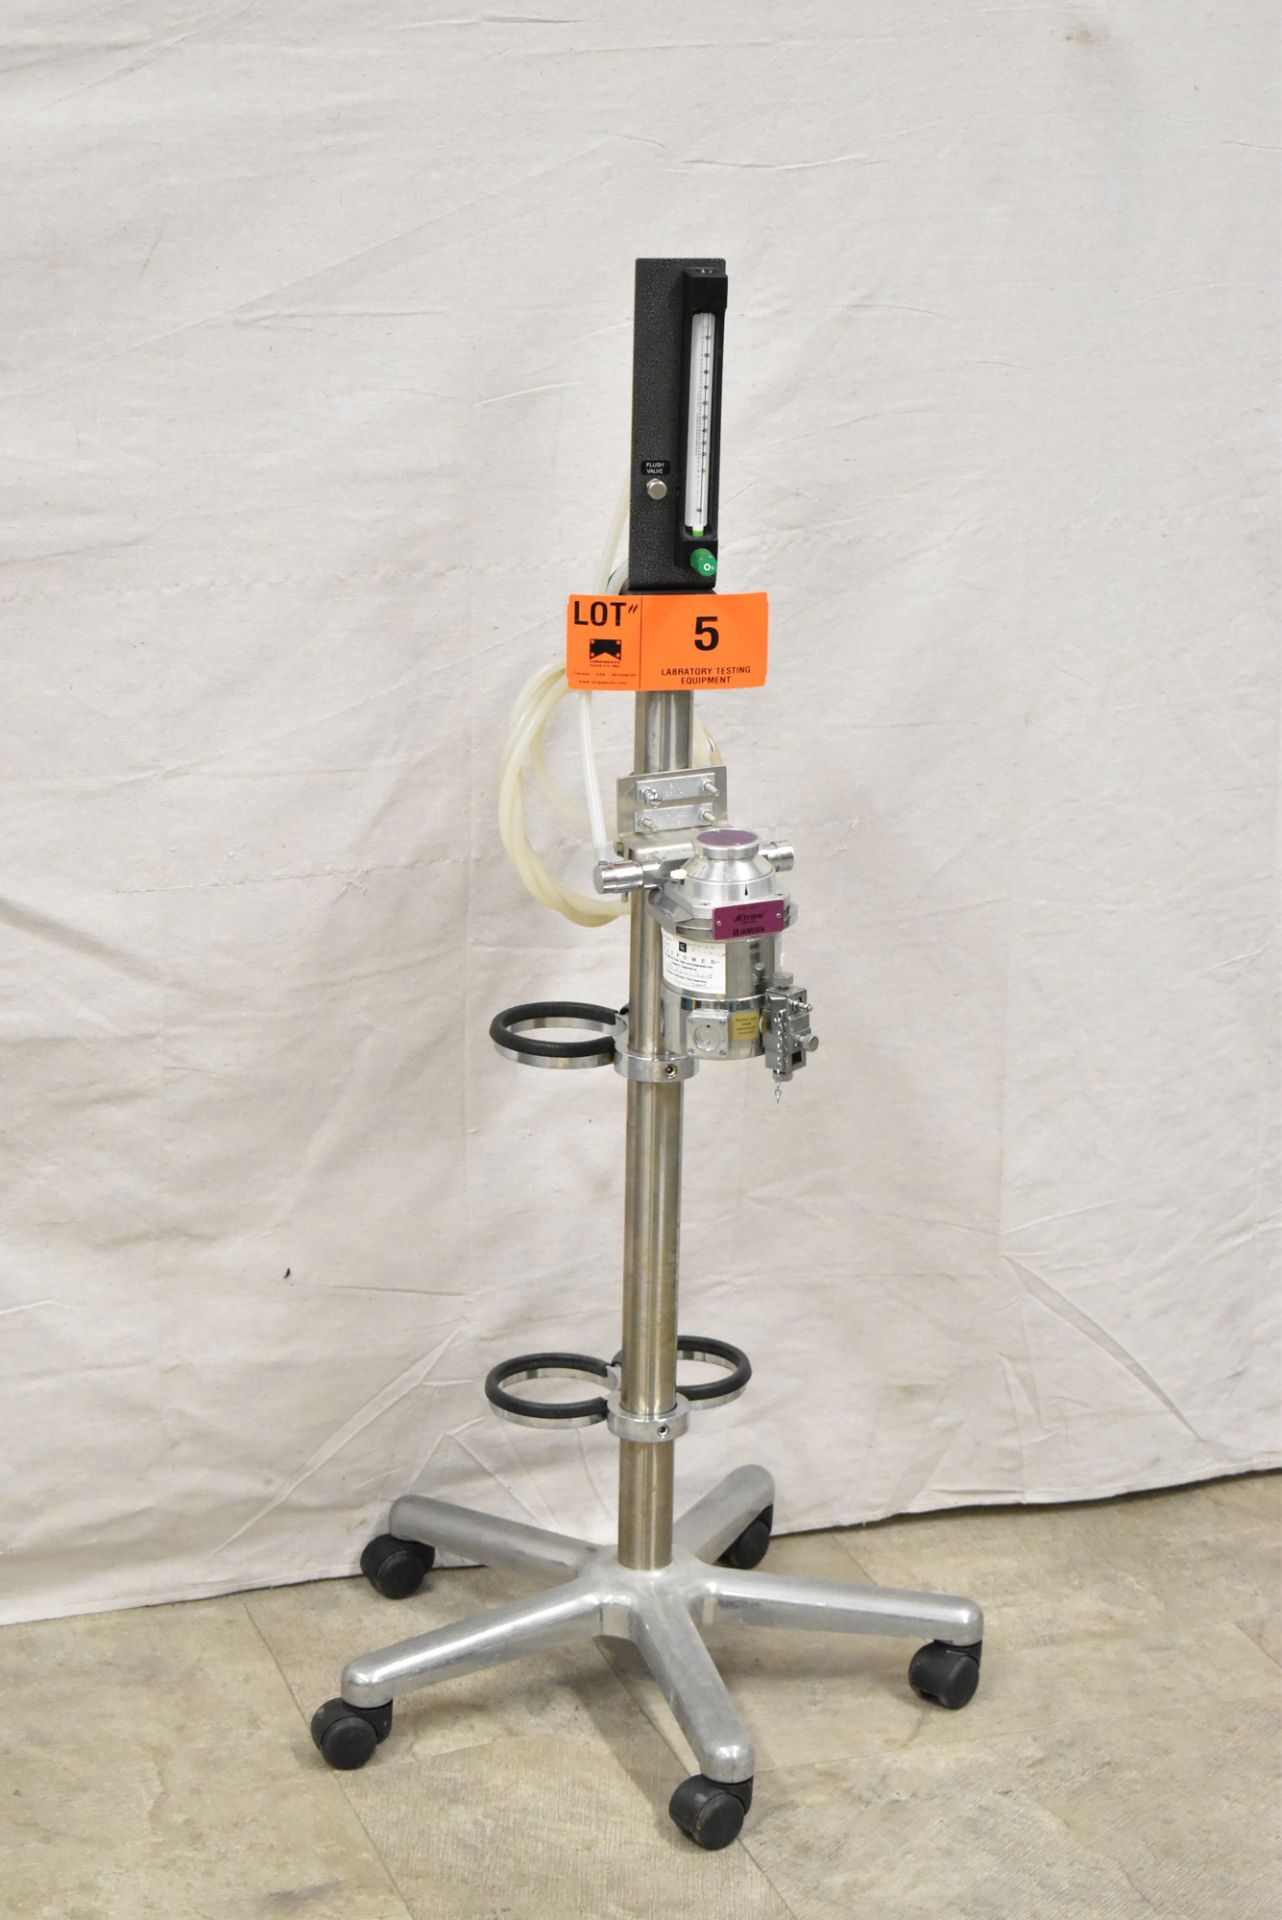 RIVER MEDICAL ENGINEERING T3ISO ISOFLURANE VAPORIZER AND FLOW METER ANESTHESIA UNIT WITH HOSES, - Image 2 of 8